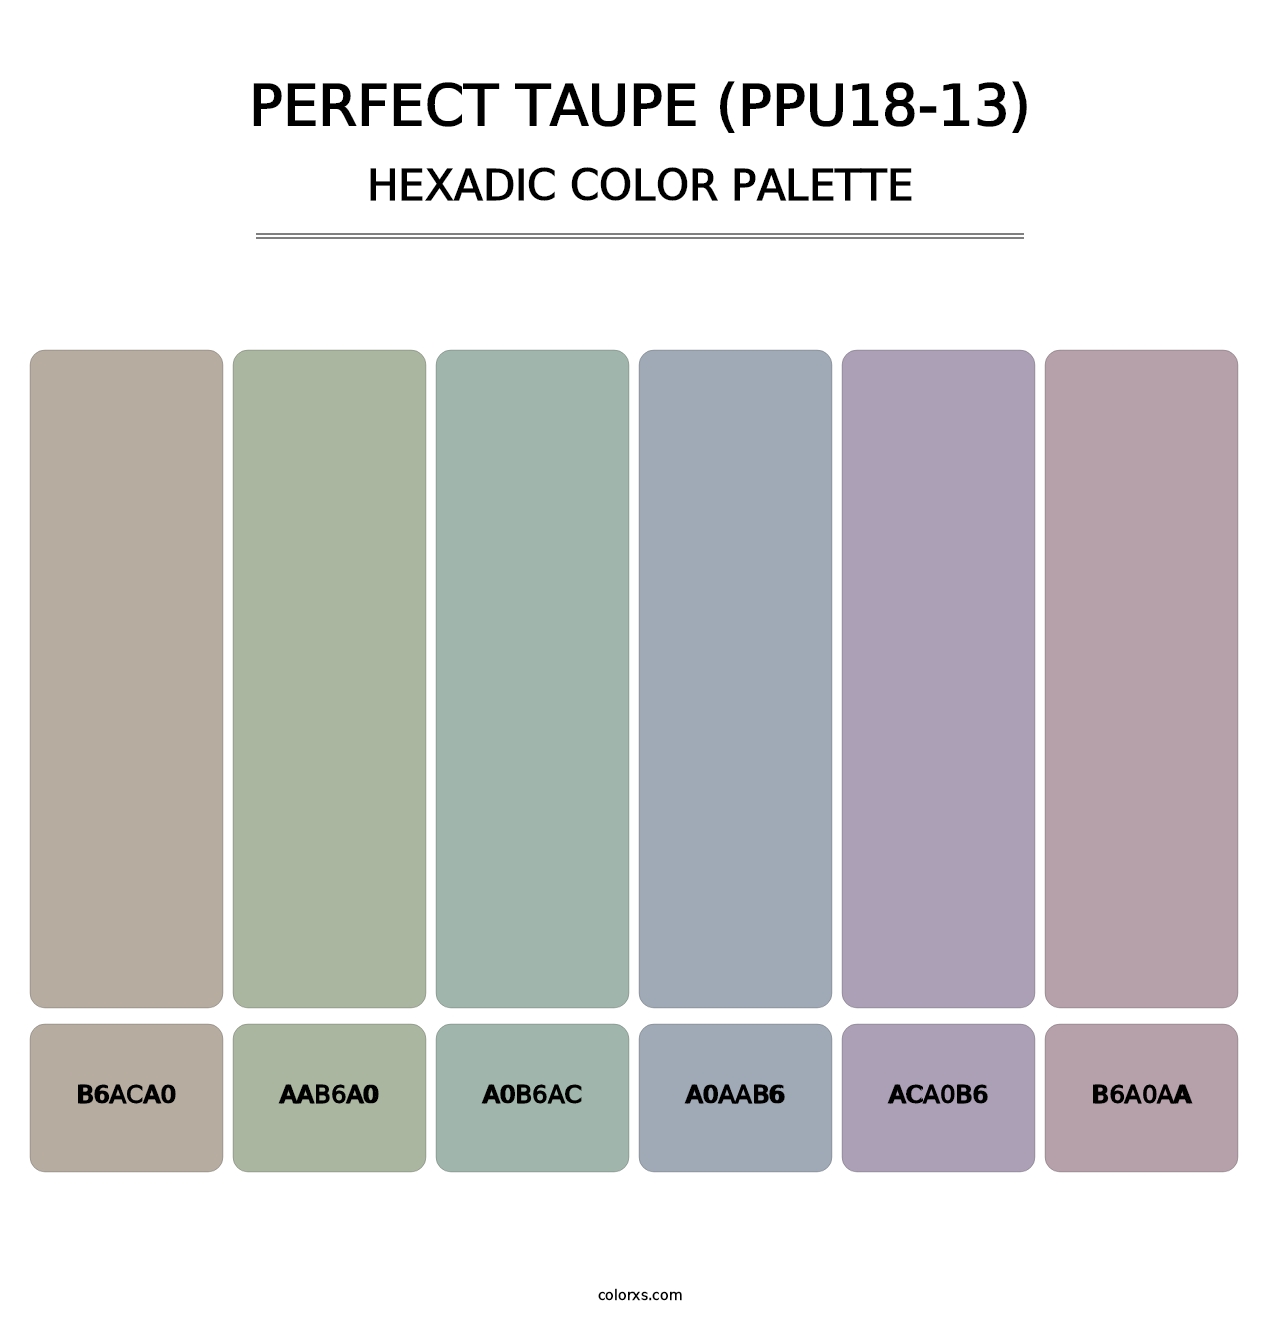 Perfect Taupe (PPU18-13) - Hexadic Color Palette